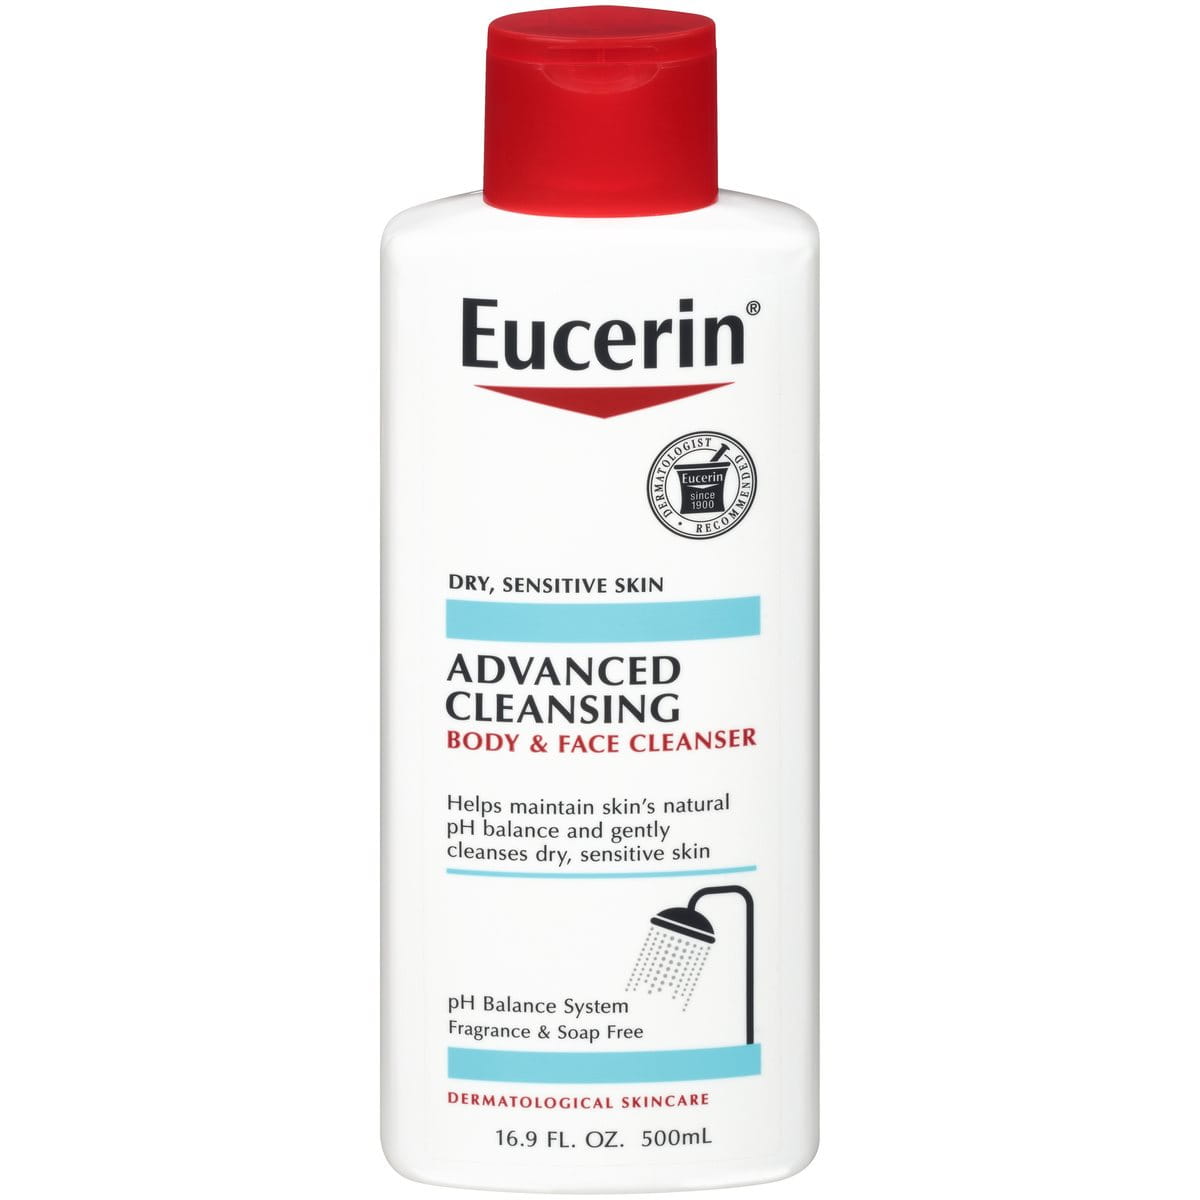 Advanced Cleansing Body & Face Cleanser